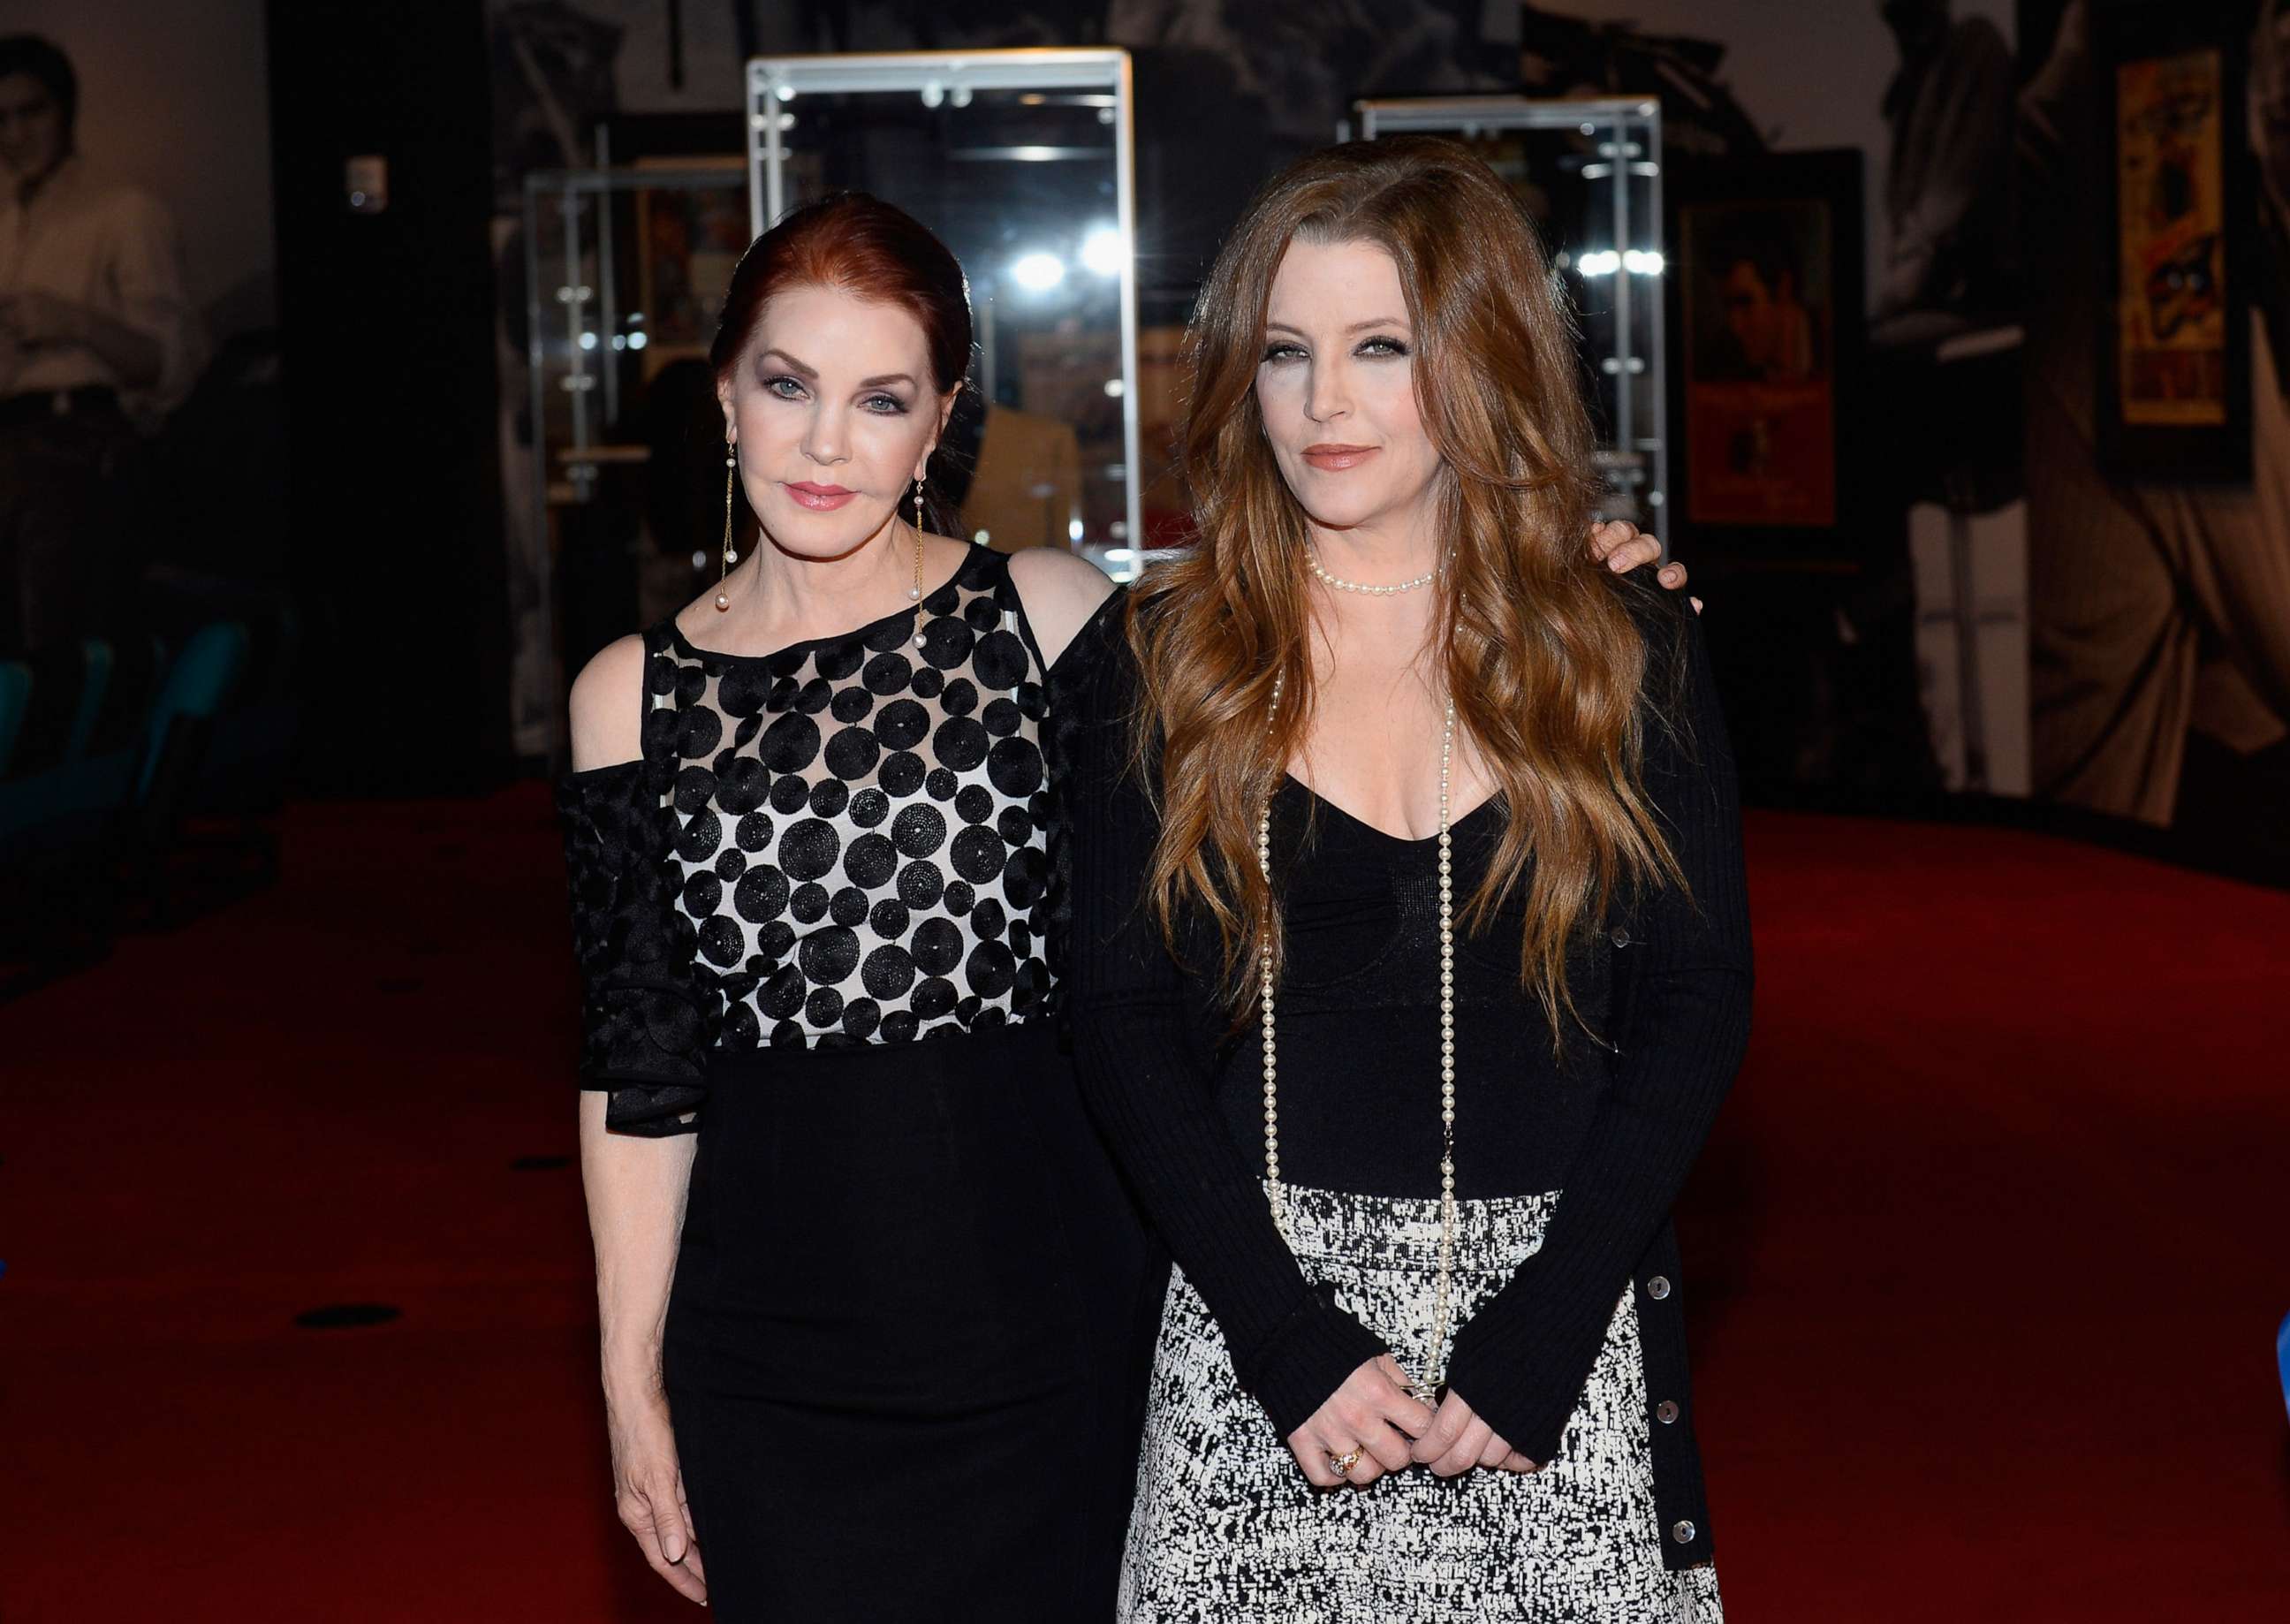 PHOTO: Priscilla Presley and Lisa Marie Presley attend the ribbon-cutting ceremony during the grand opening of "Graceland Presents ELVIS: The Exhibition - The Show - The Experience" at the Westgate Las Vegas Resort & Casino, April 23, 2015, in Las Vegas.